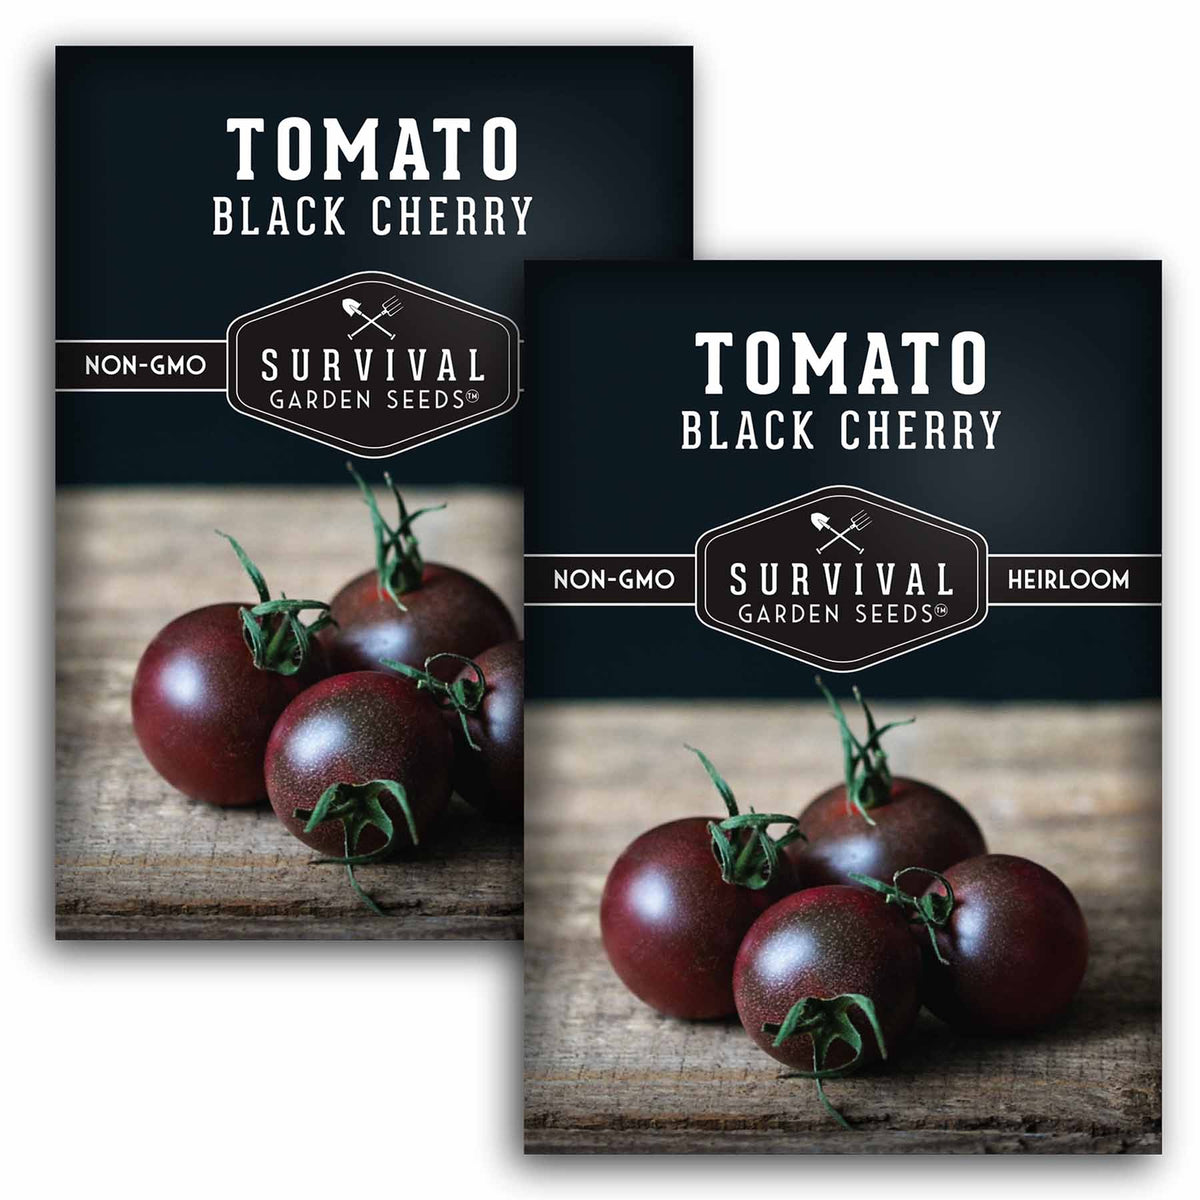 2 packets of Black Cherry Tomato seeds